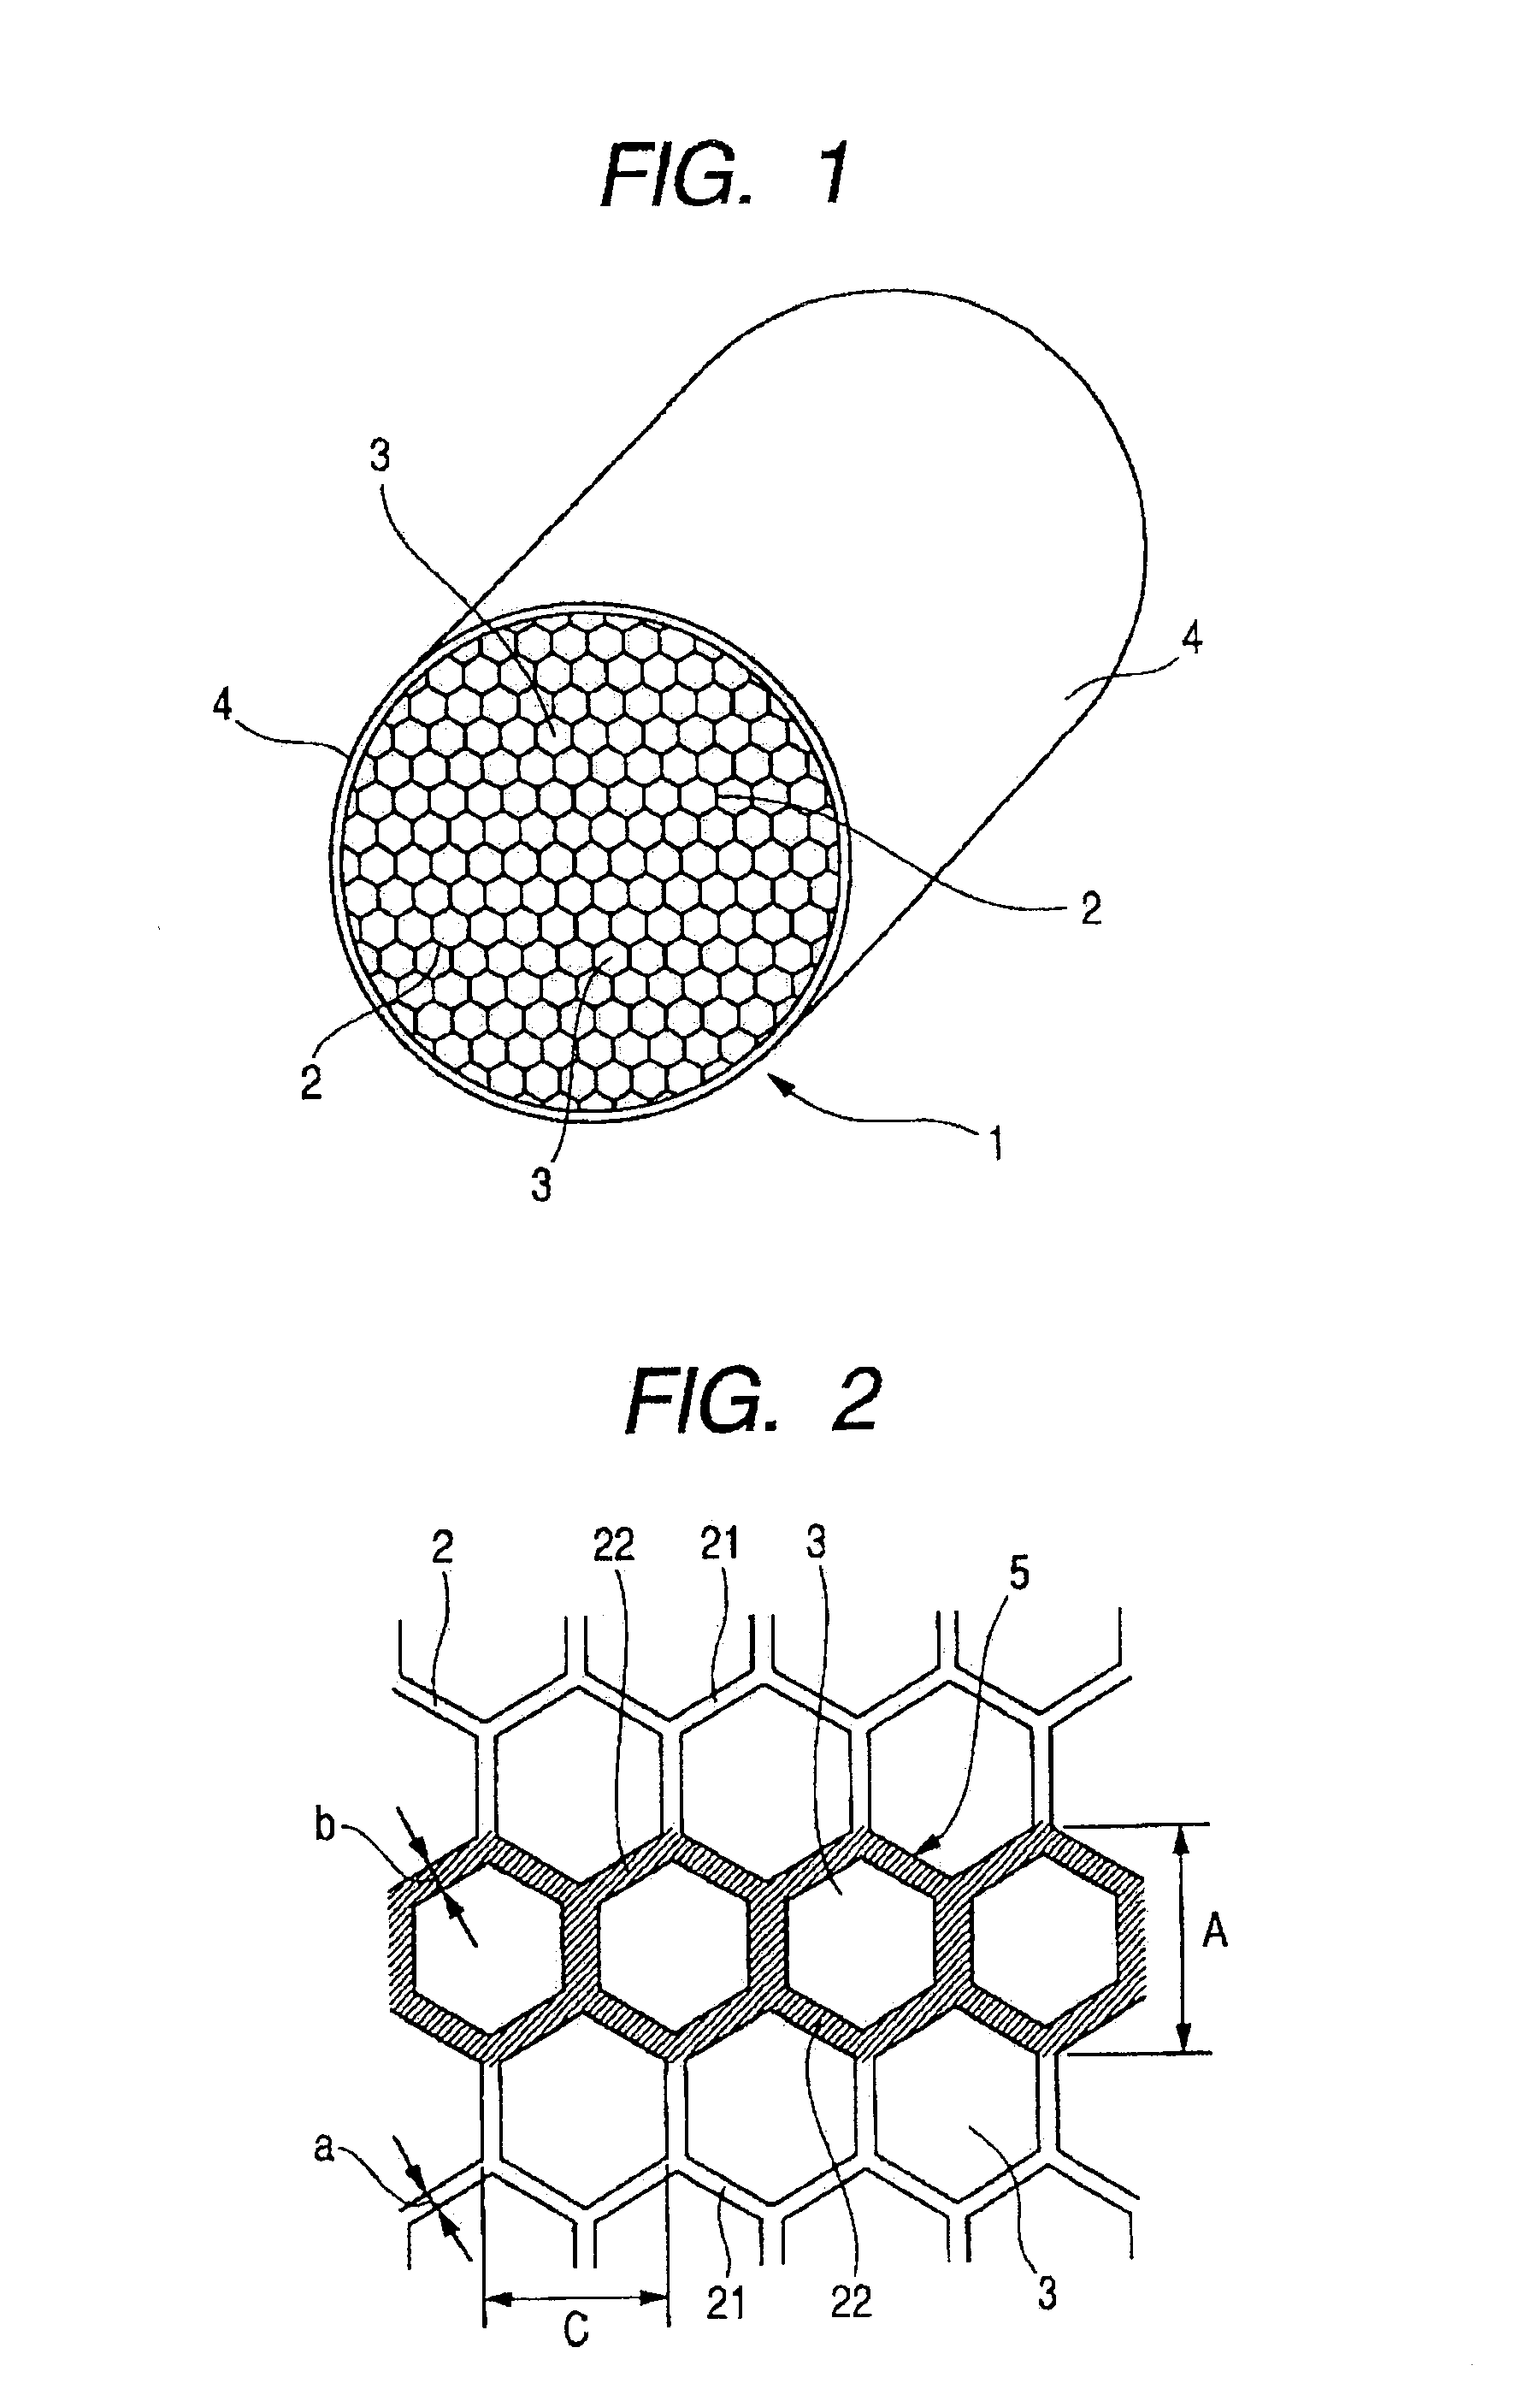 Honeycomb structure body composed of a plurality of hexagonal cells